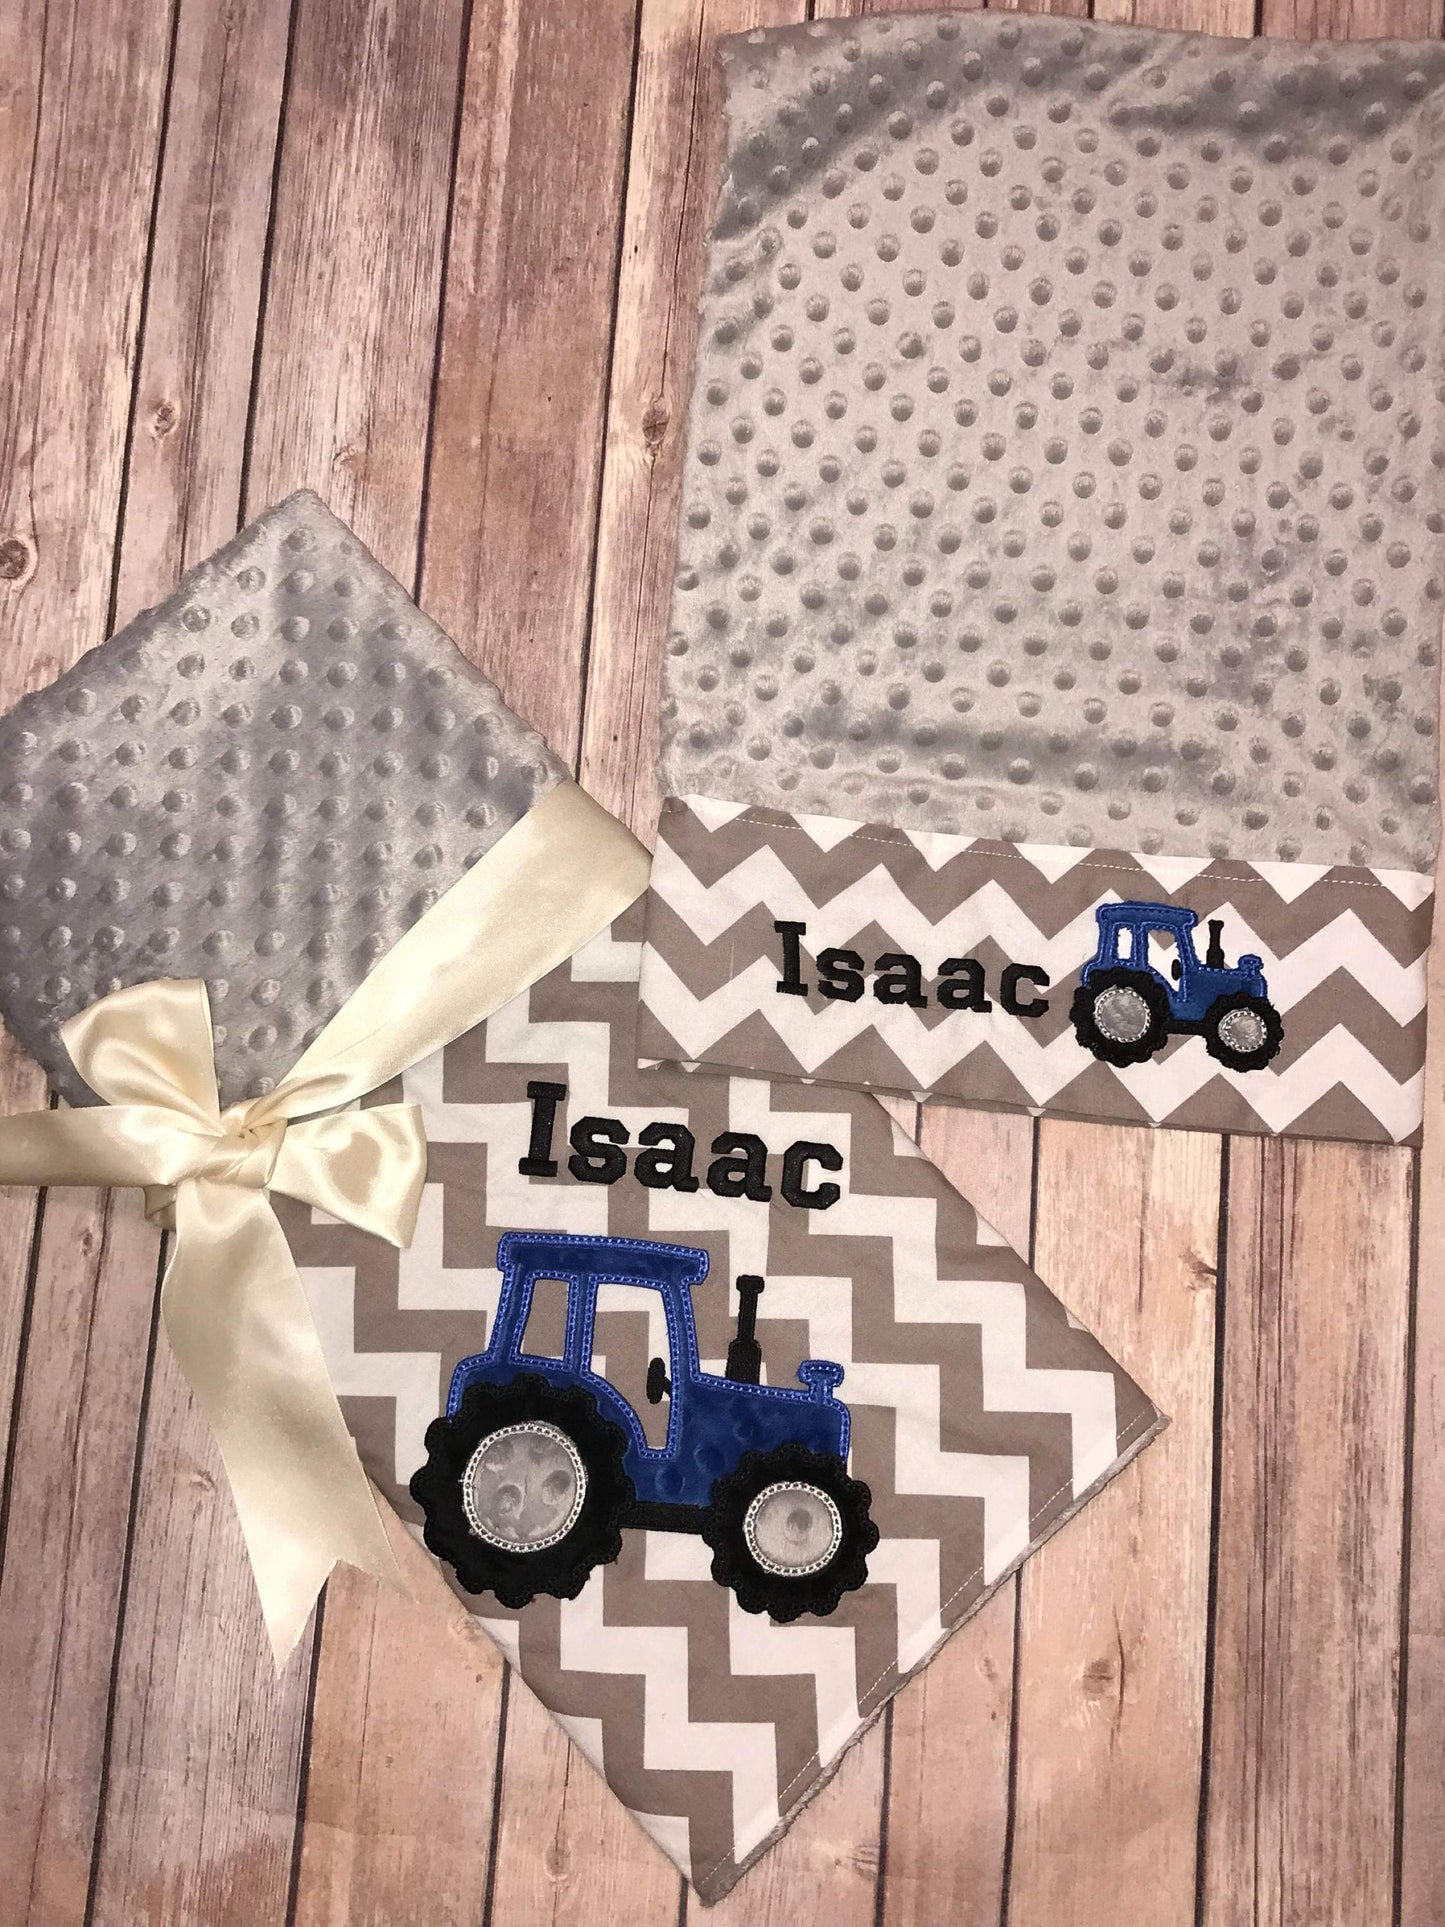 Tractor Nap Set - Personalized Minky Blanket and Pillowcase with embroidered Tractor - Travel or Standard Size